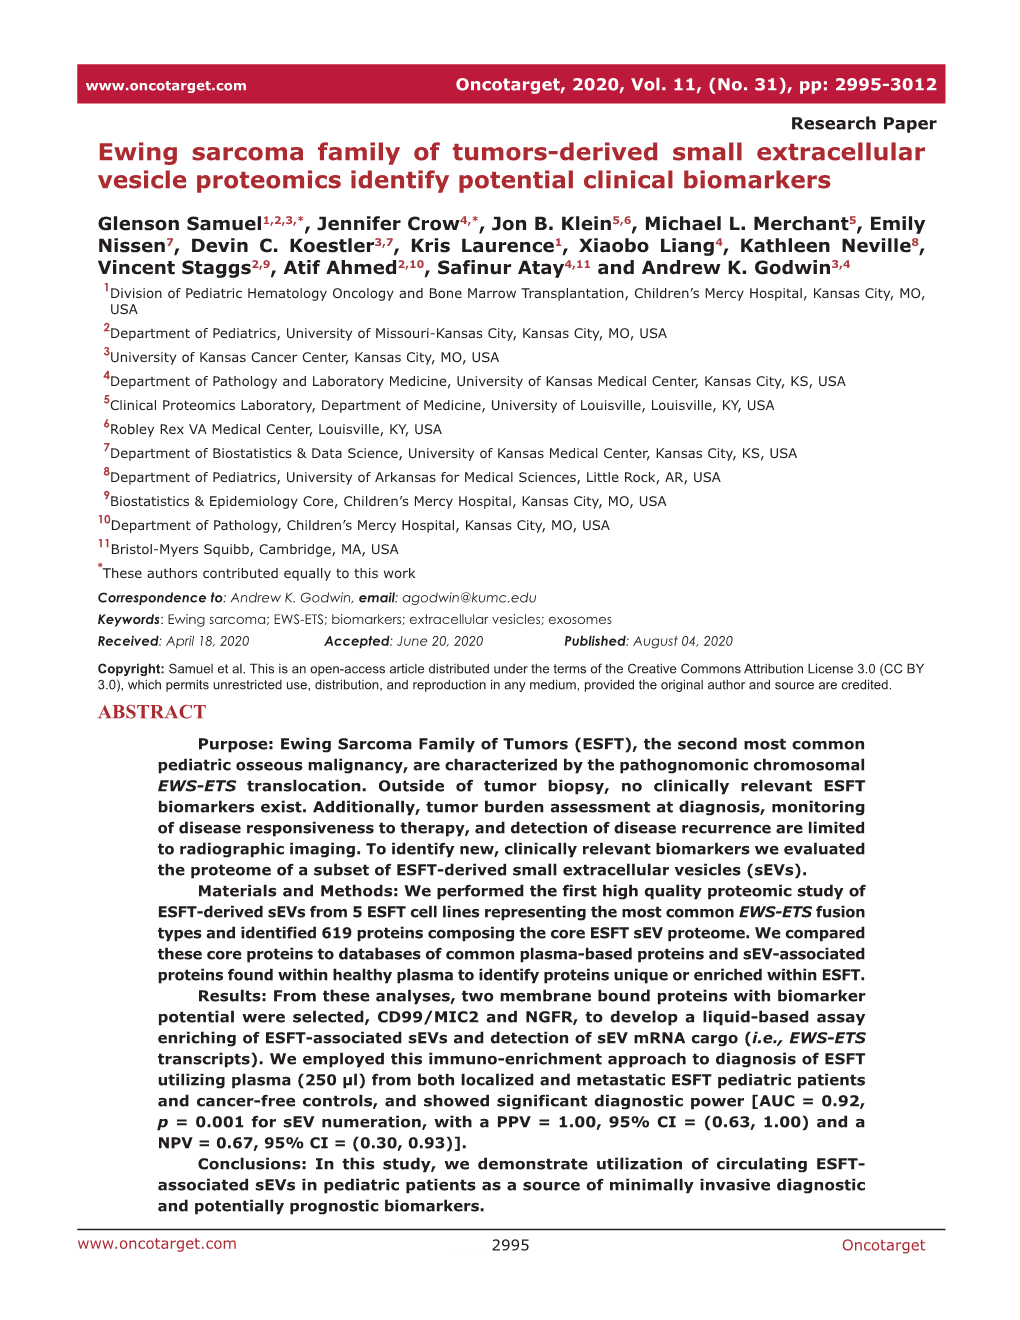 Ewing Sarcoma Family of Tumors-Derived Small Extracellular Vesicle Proteomics Identify Potential Clinical Biomarkers